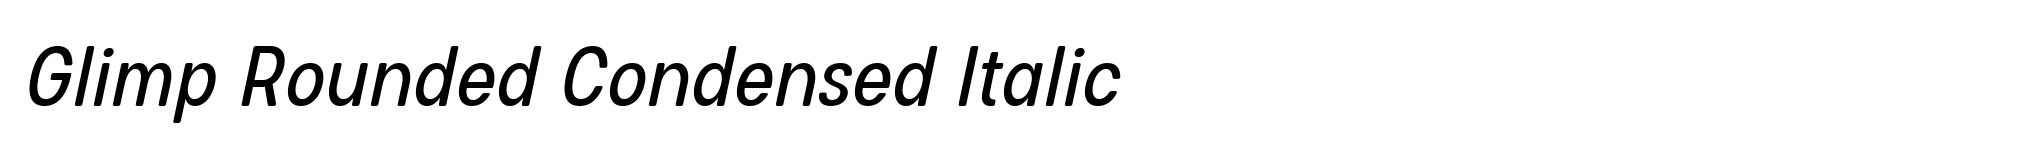 Glimp Rounded Condensed Italic image